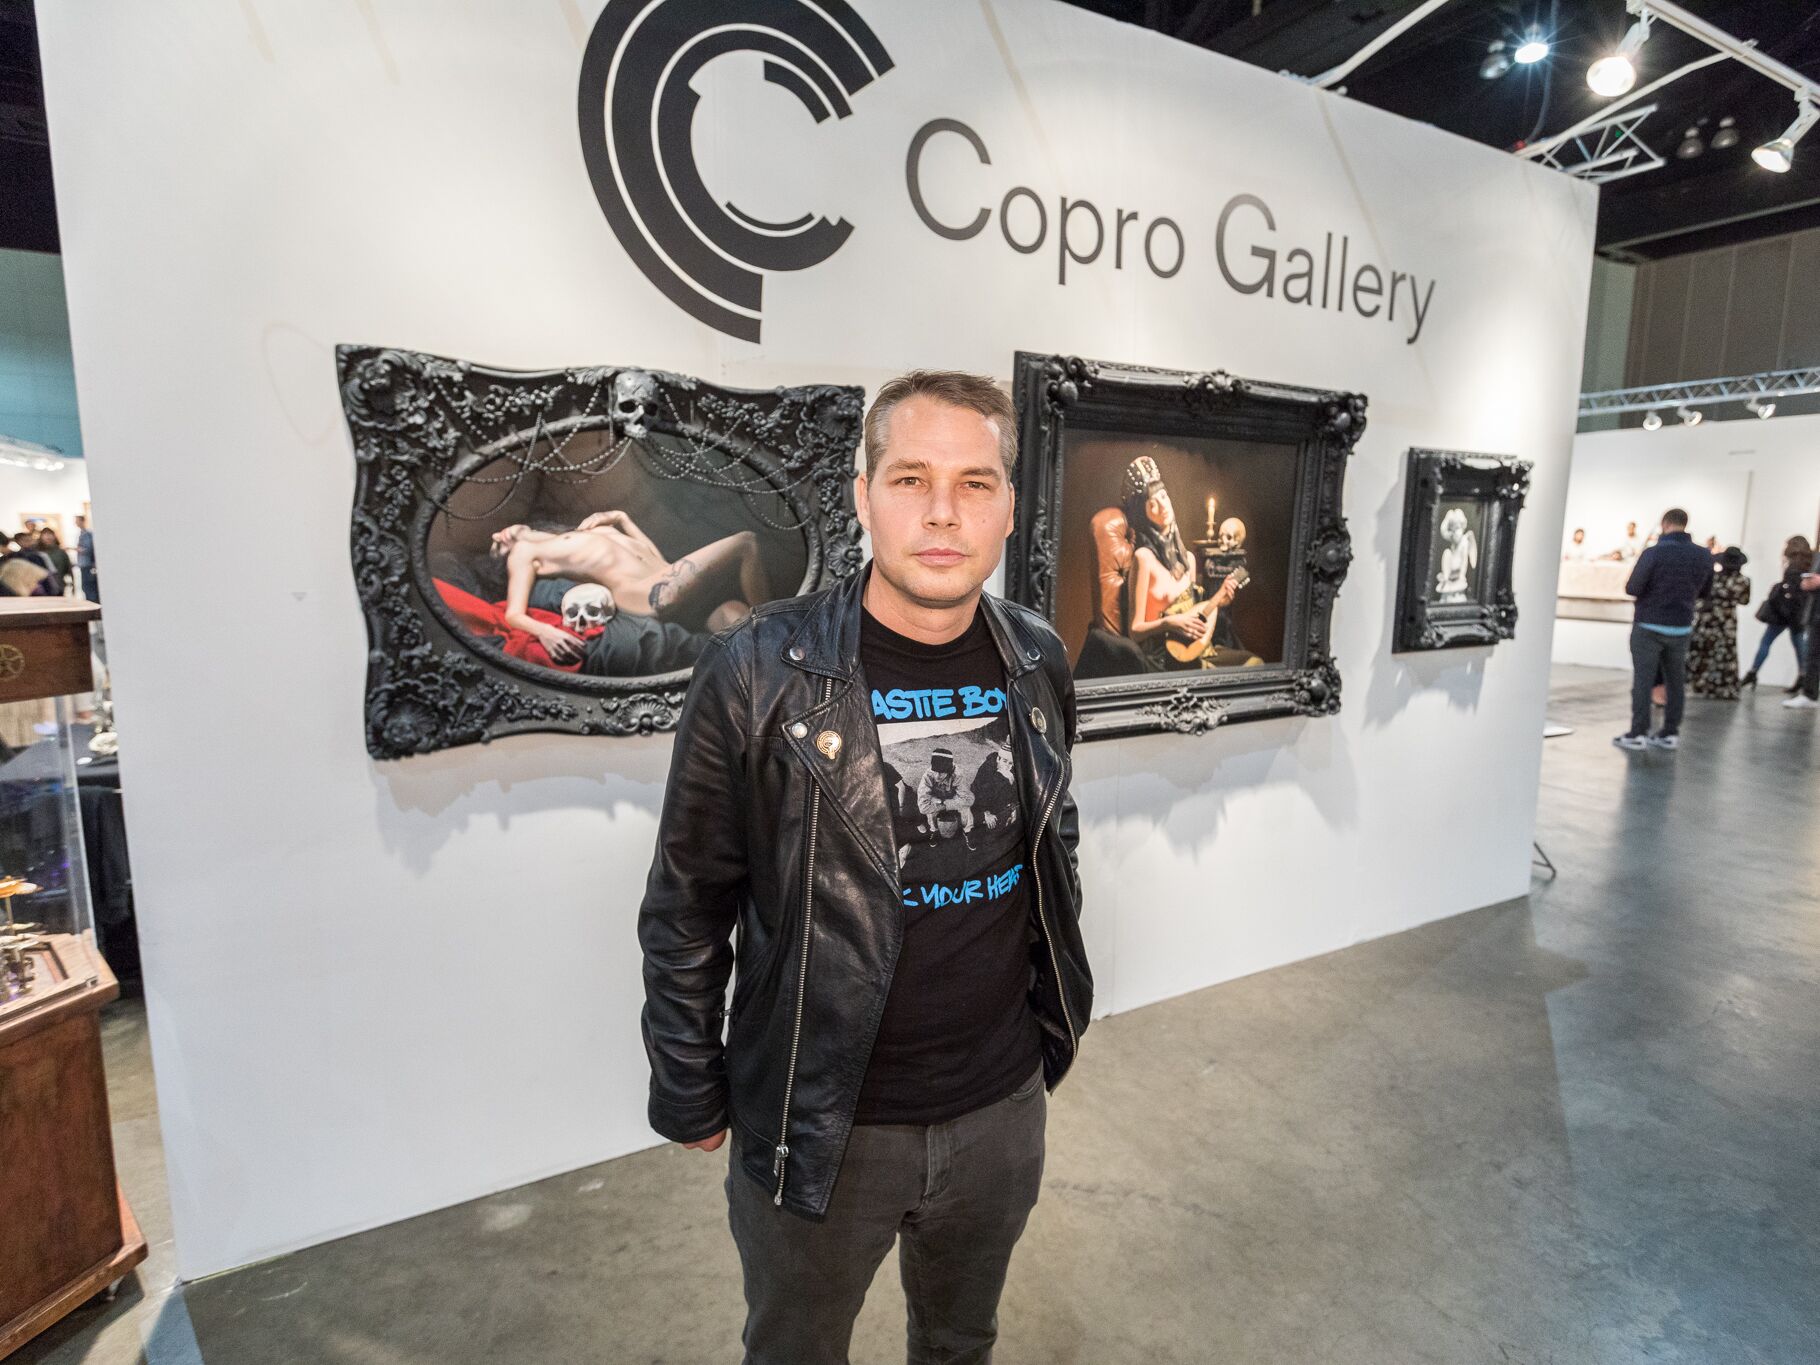 Shepard Fairey at the Copro Gallery Booth